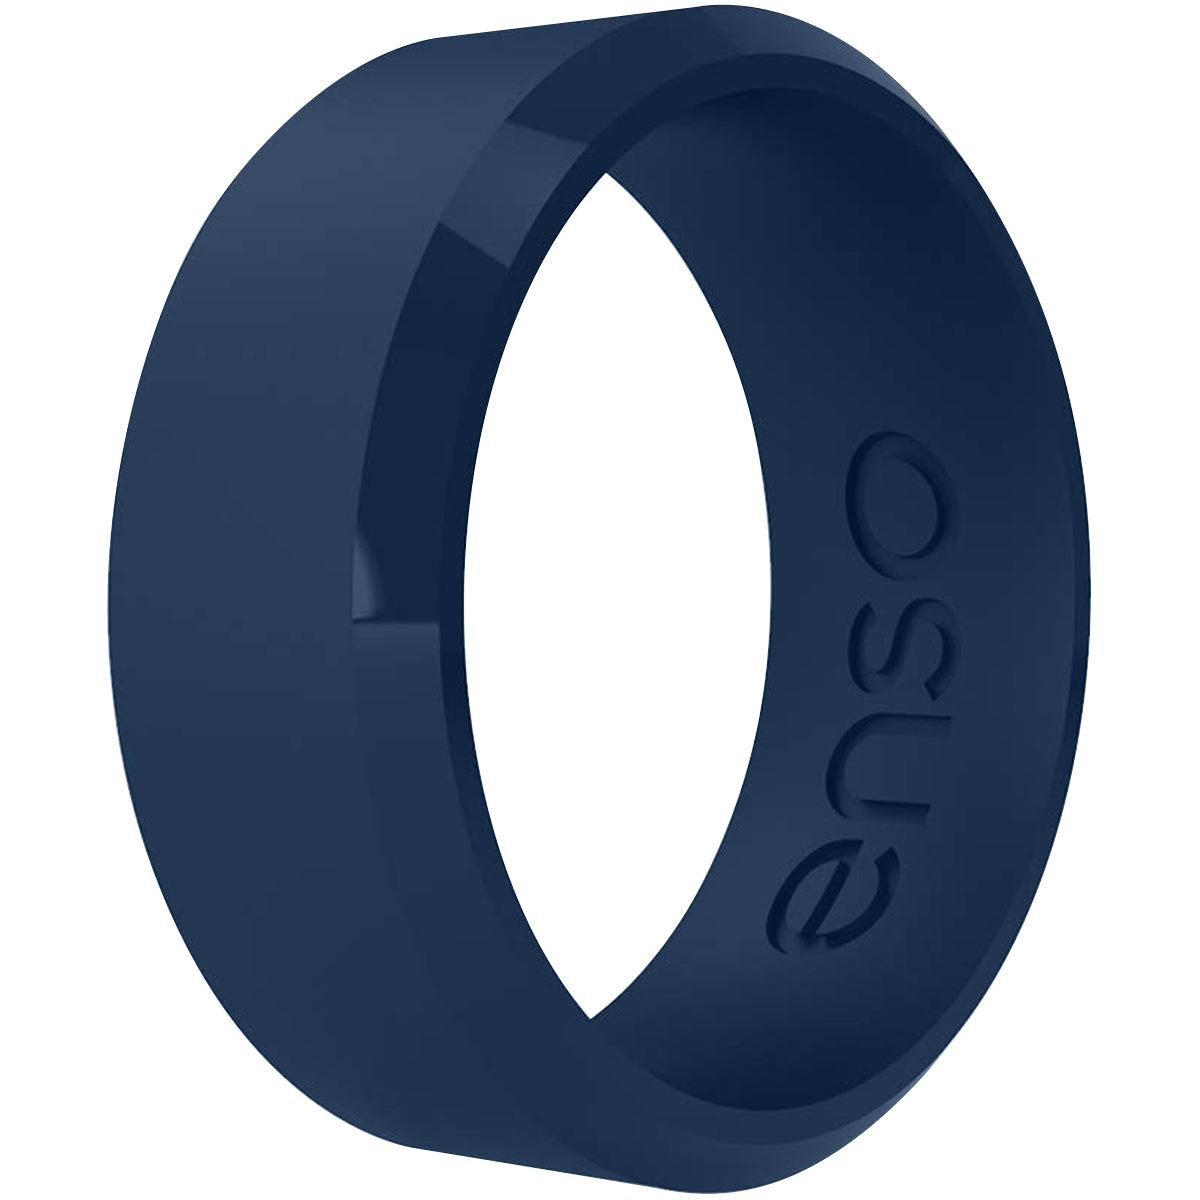 Enso Rings Classic Bevel Series Silicone Ring - Navy Blue Enso Rings